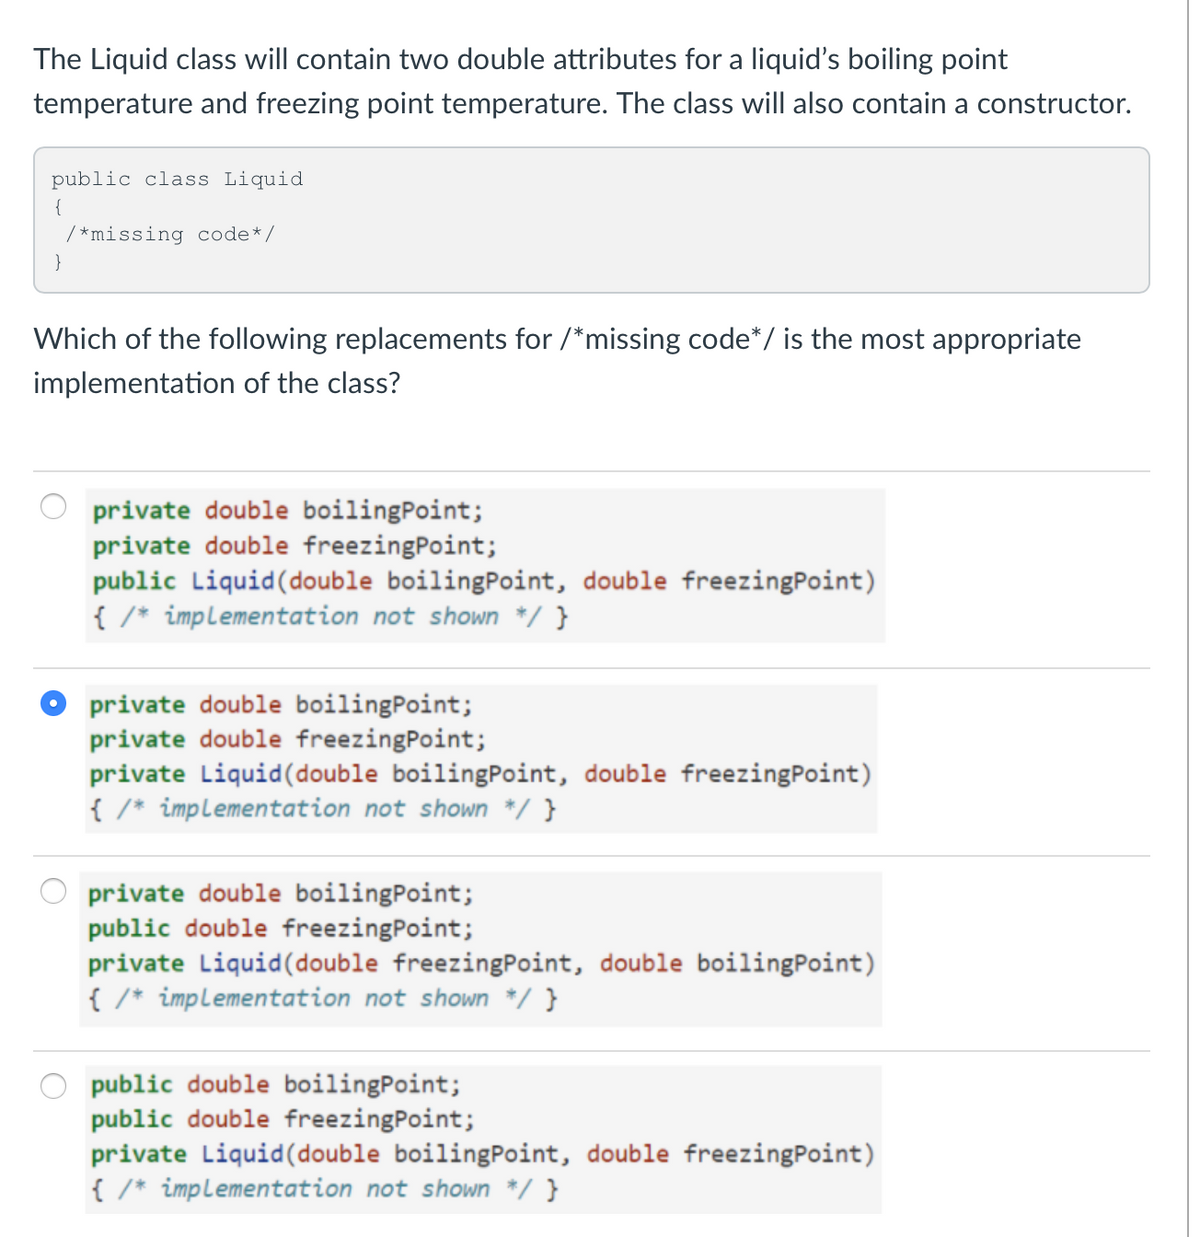 The Liquid class will contain two double attributes for a liquid's boiling point
temperature and freezing point temperature. The class will also contain a constructor.
public class Liquid
/*missing code*/
}
Which of the following replacements for /*missing code*/ is the most appropriate
implementation of the class?
private double boilingPoint;
private double freezingPoint;
public Liquid(double boilingPoint, double freezingPoint)
{ /* impLementation not shown */ }
private double boilingPoint;
private double freezingPoint;
private Liquid(double boilingPoint, double freezingPoint)
{ /* impLementation not shown */ }
private double boilingPoint;
public double freezingPoint;
private Liquid(double freezingPoint, double boilingPoint)
{ /* impLementation not shown */ }
public double boilingPoint;
public double freezingPoint;
private Liquid(double boilingPoint, double freezingPoint)
{ /* implementation not shown */ }
